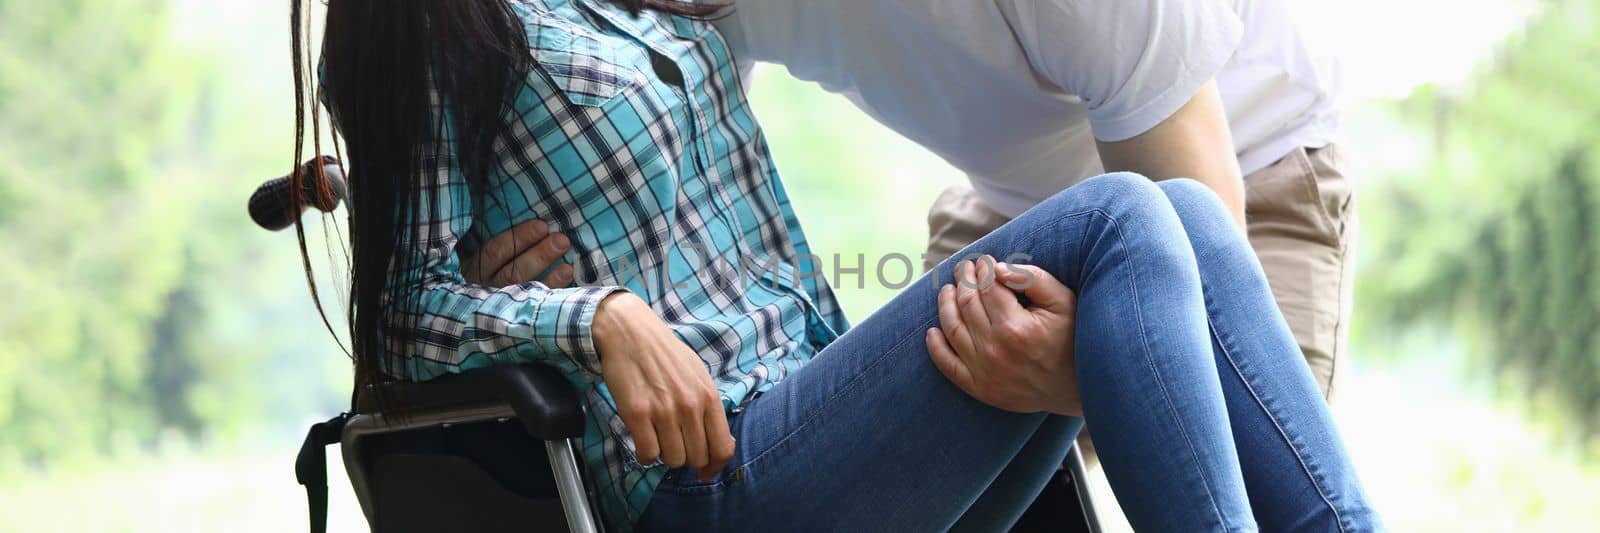 Man helps disabled woman into wheelchair closeup by kuprevich